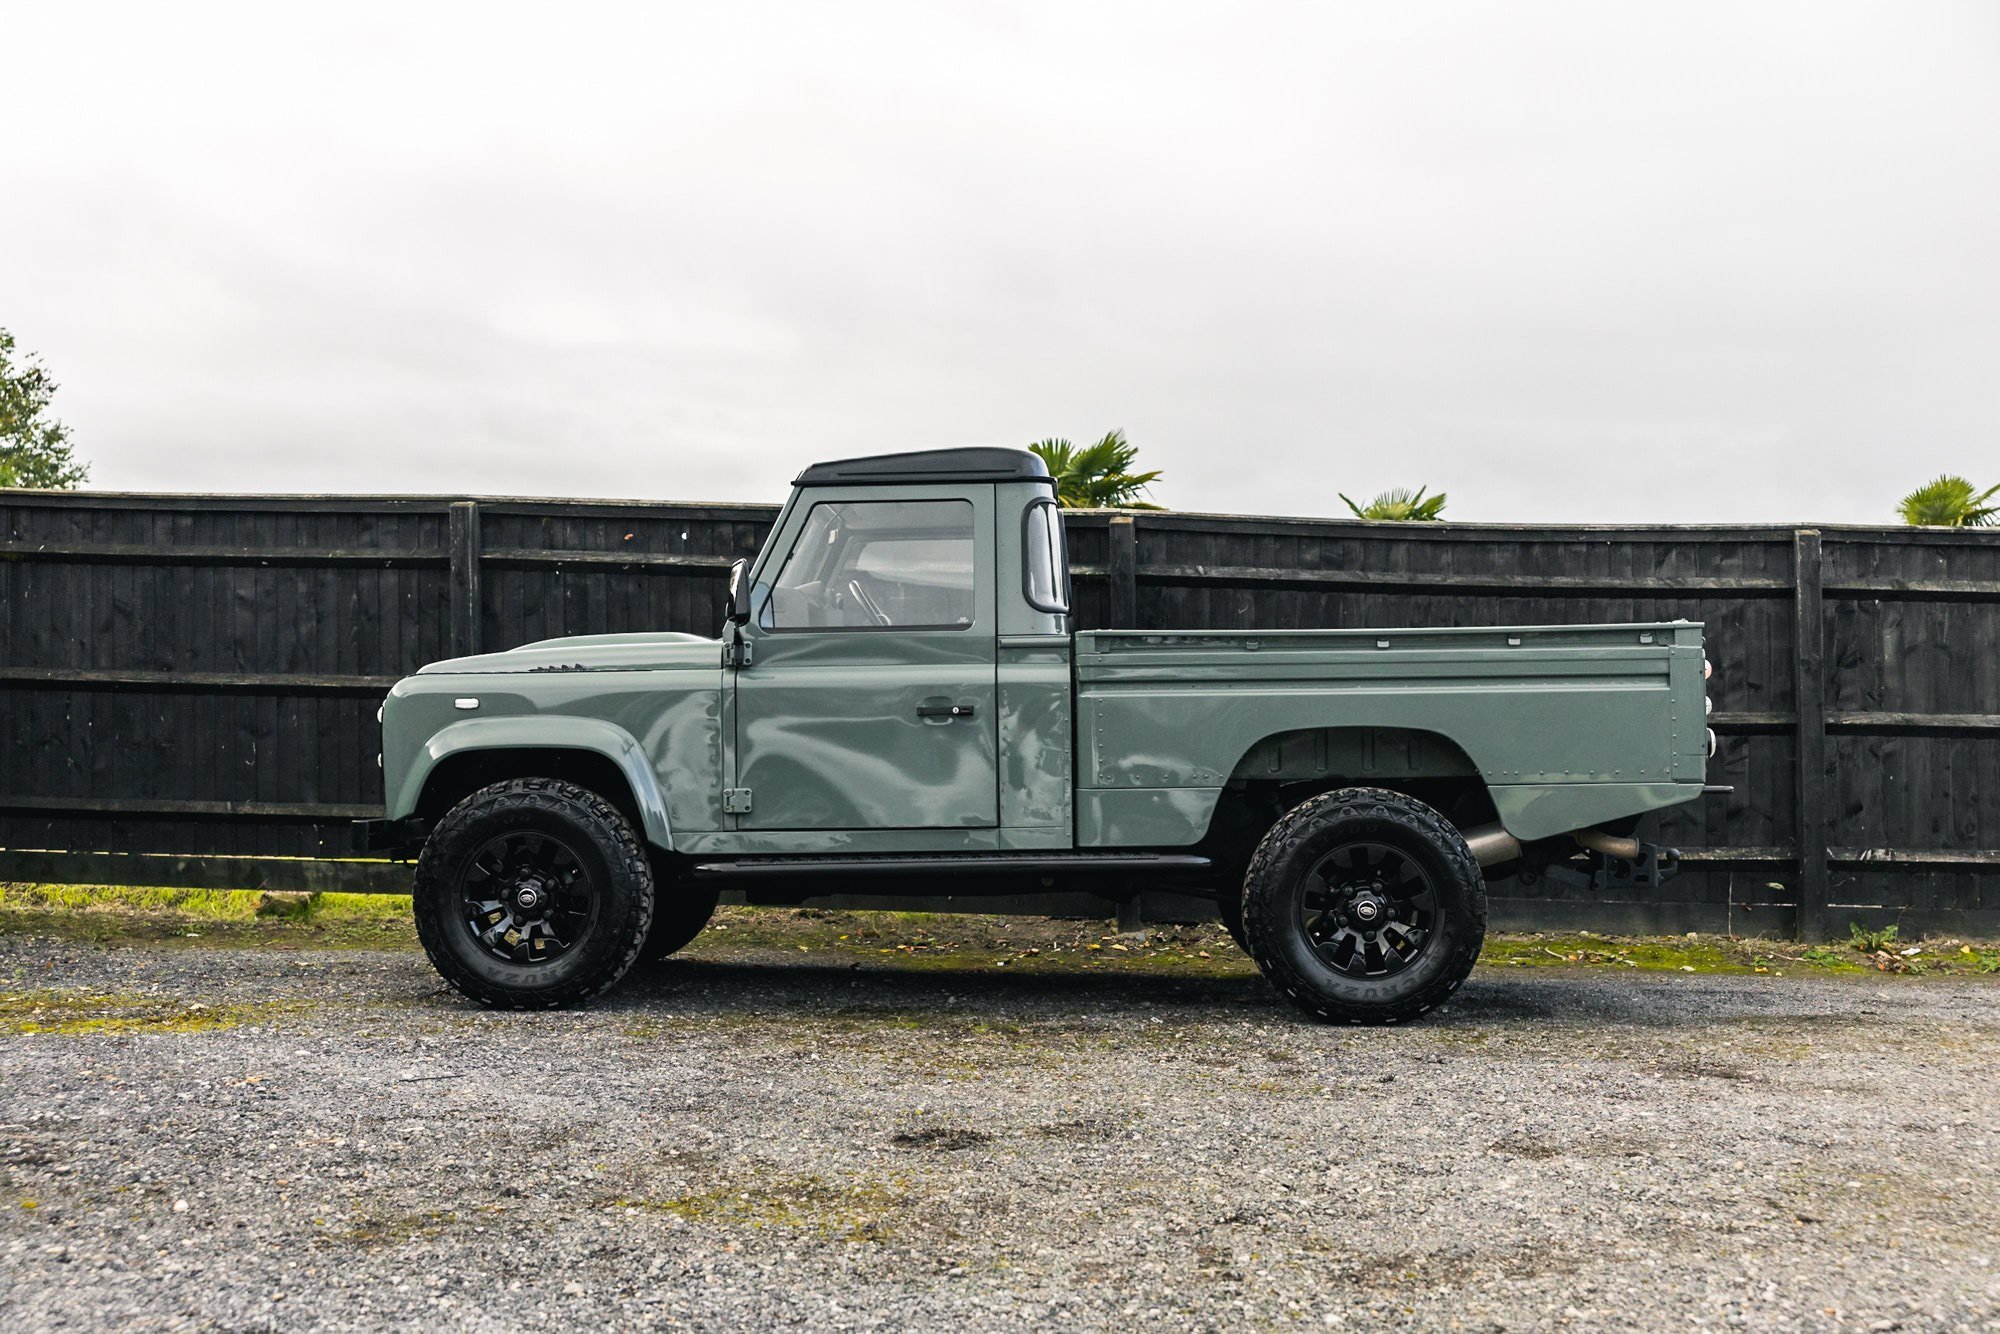 2007 LAND ROVER DEFENDER 110 SINGLE CAB 'HIGH CAPACITY' PICK UP